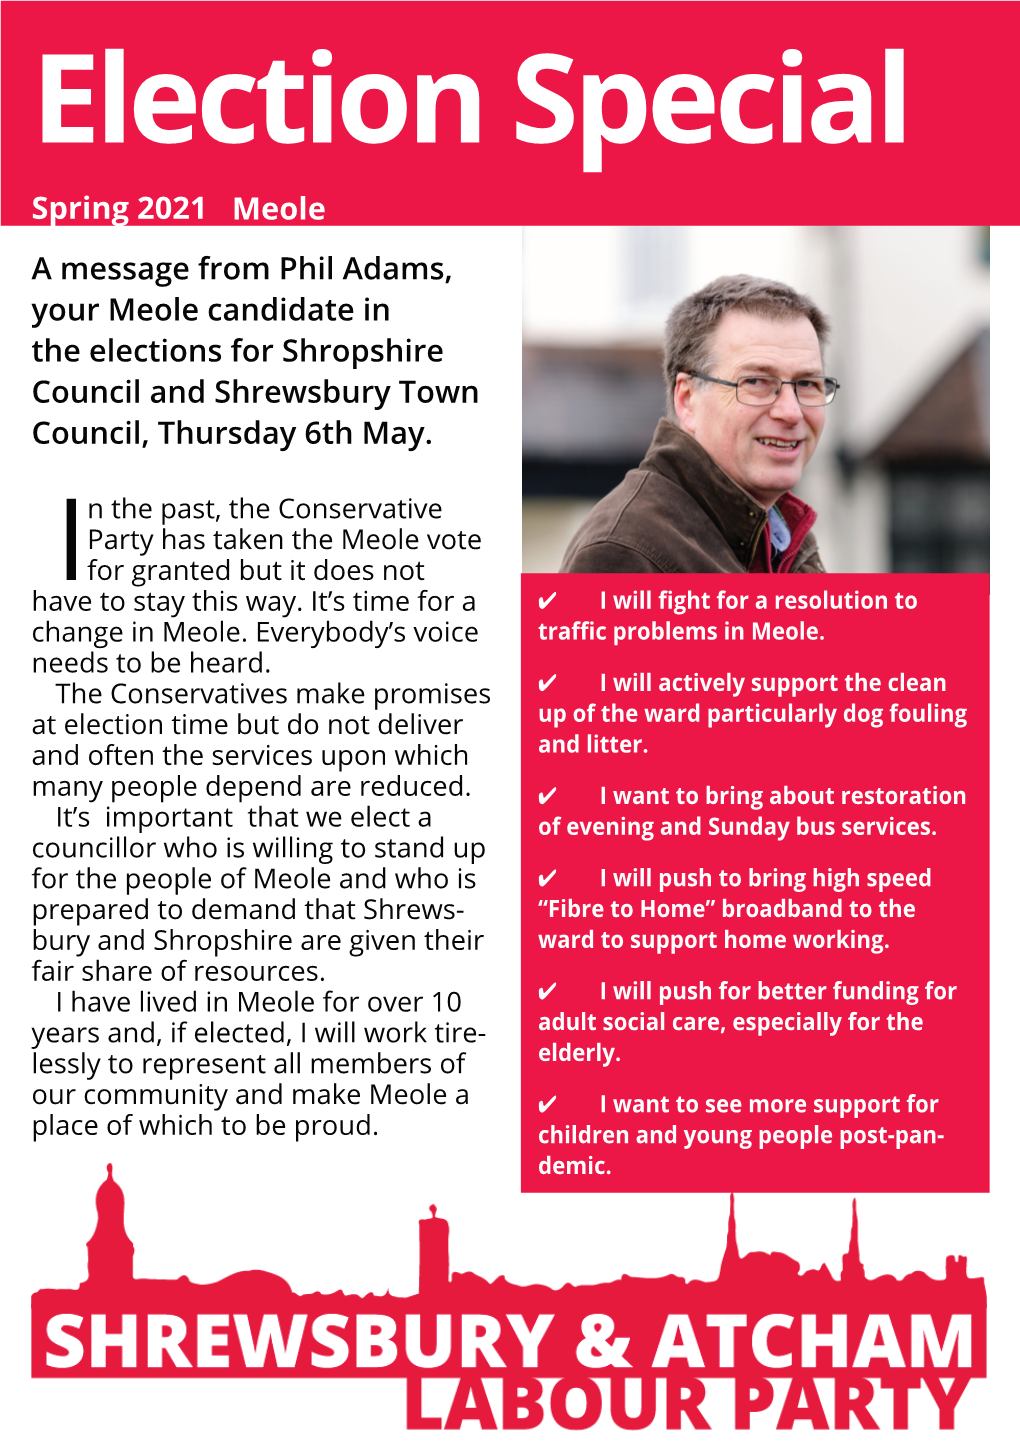 A Message from Phil Adams, Your Meole Candidate in the Elections for Shropshire Council and Shrewsbury Town Council, Thursday 6Th May